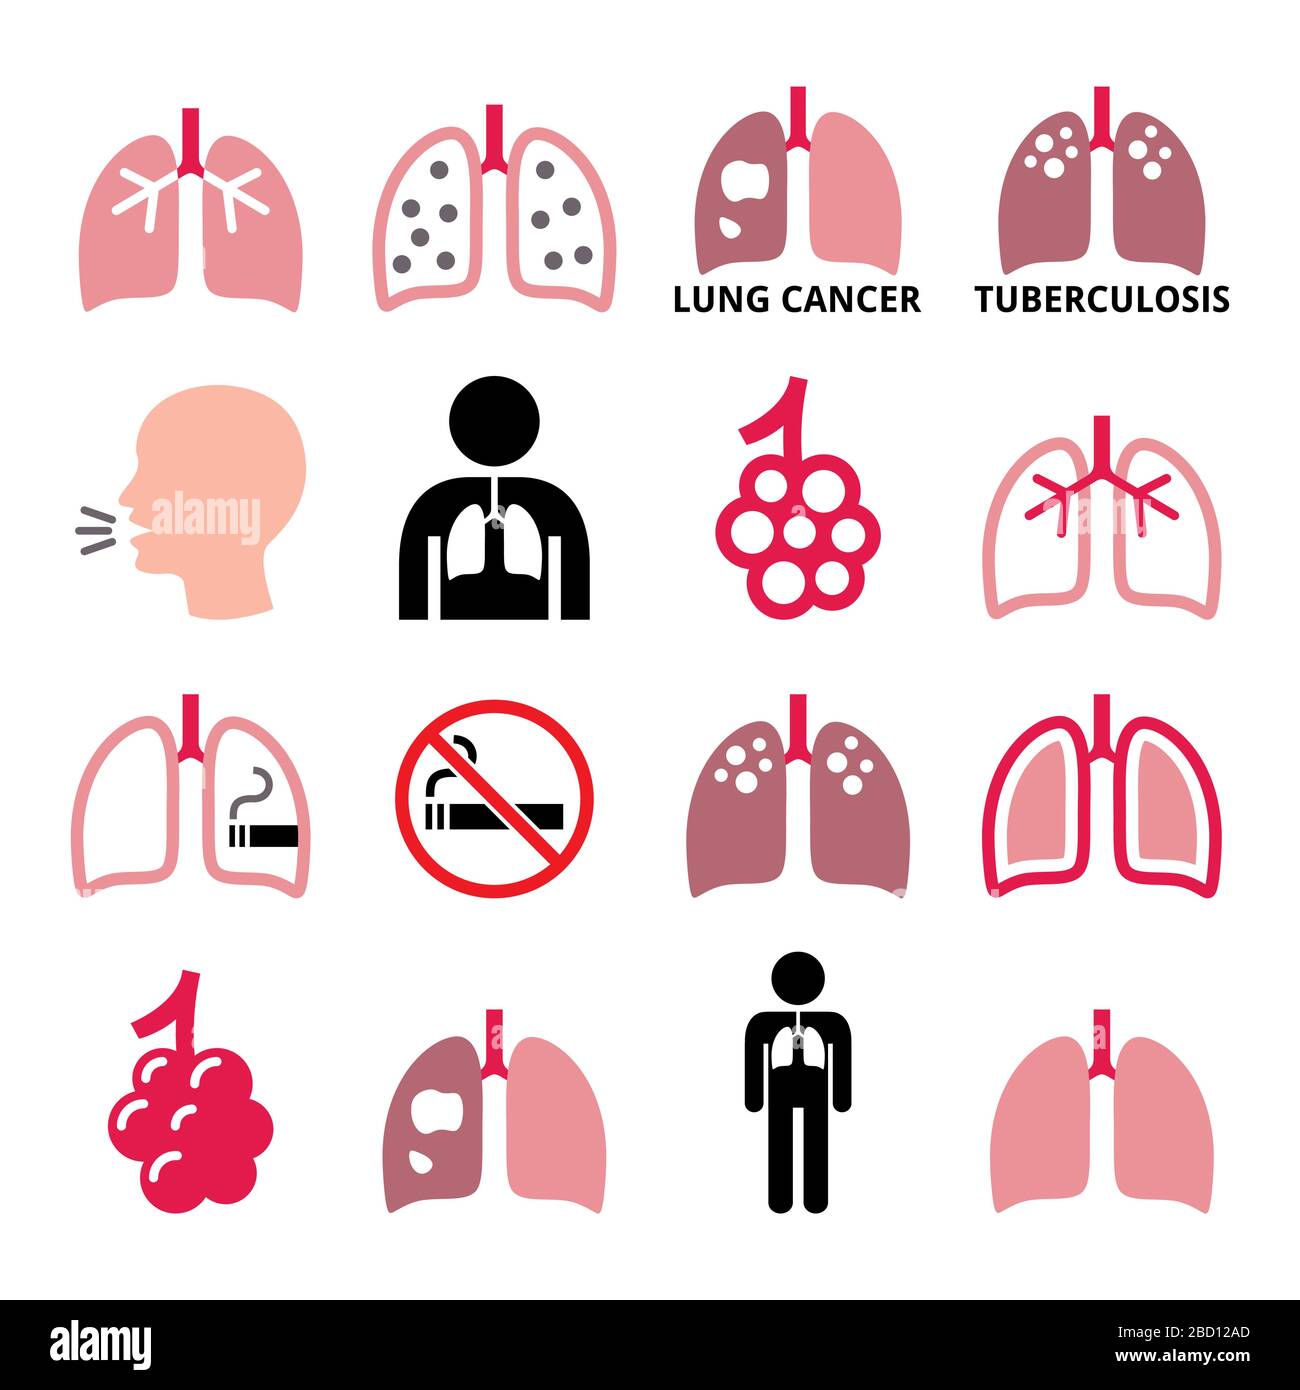 Lungs, lung disease vector icons set - tuberculosis, cancer, smoker's lungs - healthcare concept Stock Vector